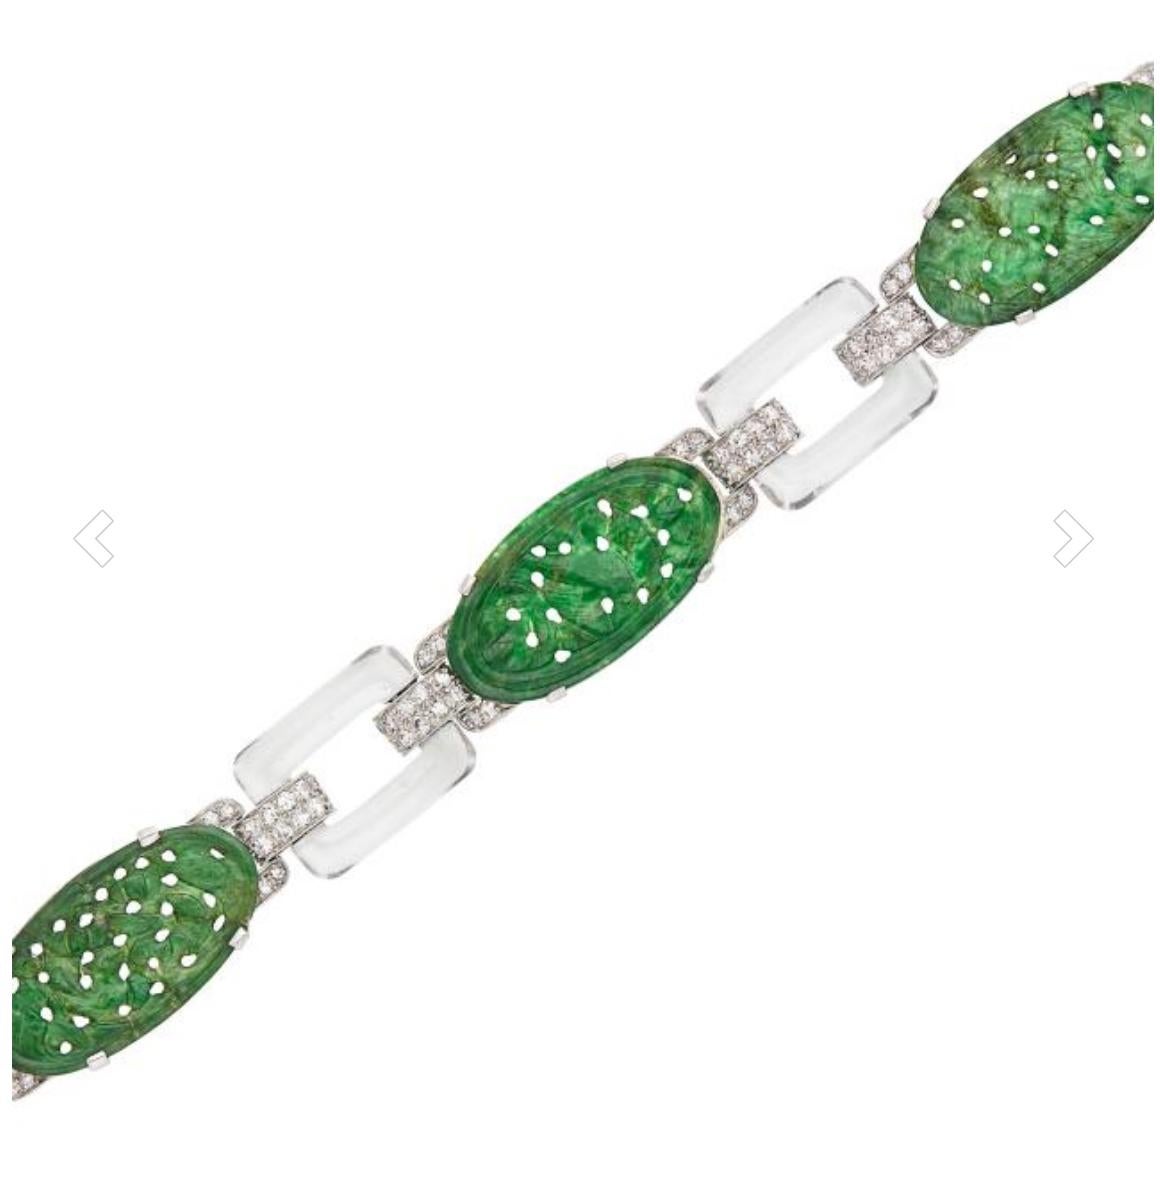 Art Deco Platinum, Carved Jade, Rock Crystal and Diamond Bracelet composed of 4 oval carved Natural Jadeite Jade measuring approximately 13.5 x 25.0 mm., quartered by diamond-set brackets, spaced by 4 rock crystal buckle links joined by diamond-set